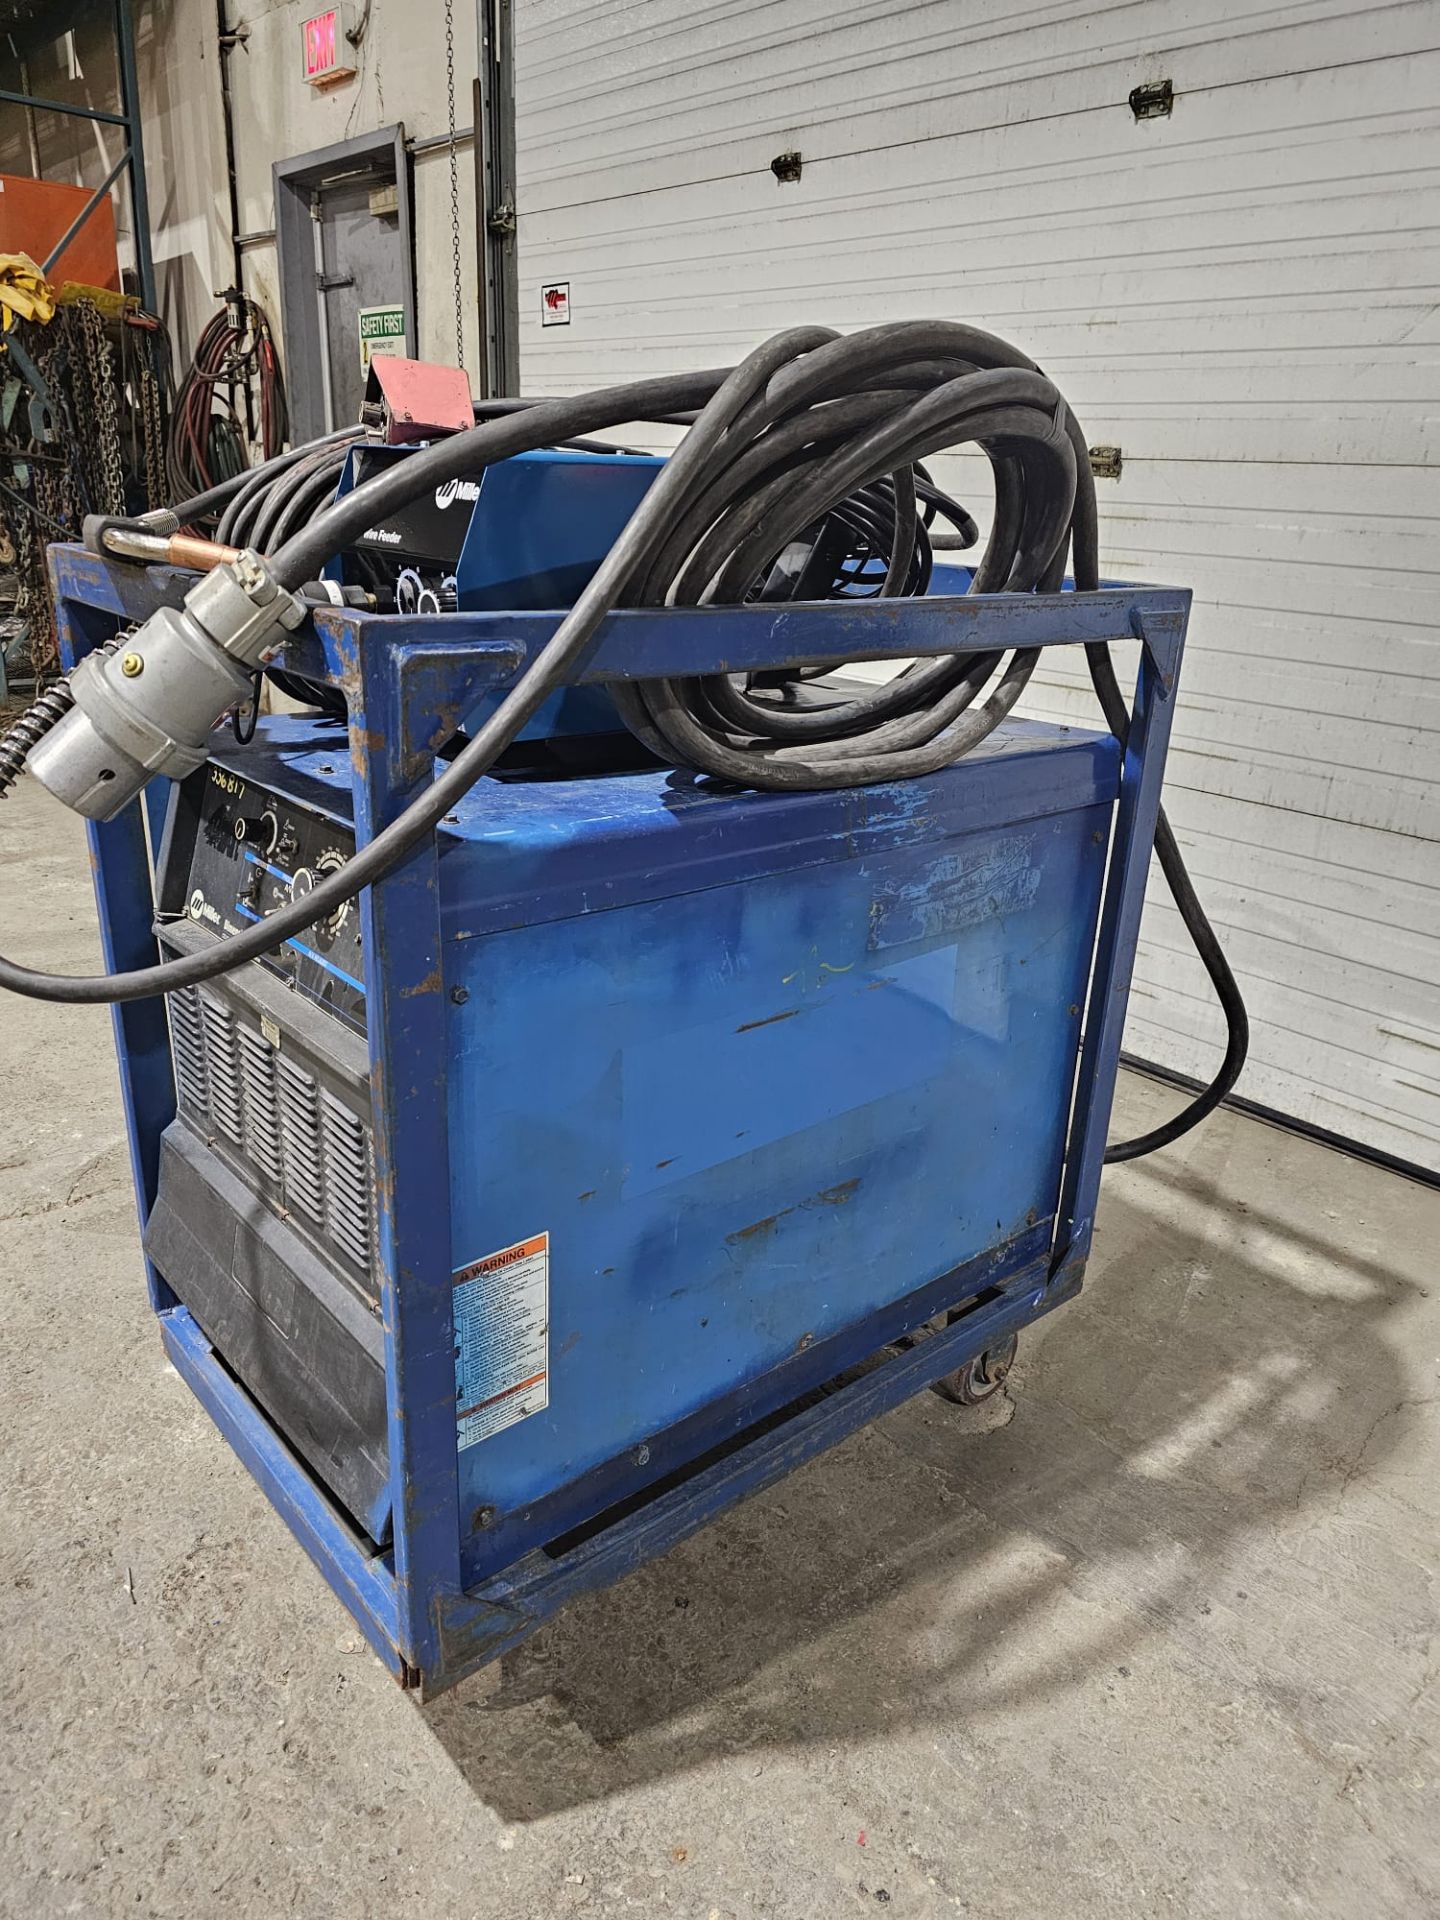 Miller Dimension 652 Mig Welder 650 Amp Mig Tig Stick Multi Process Power Source with 22A Wire - Image 3 of 10